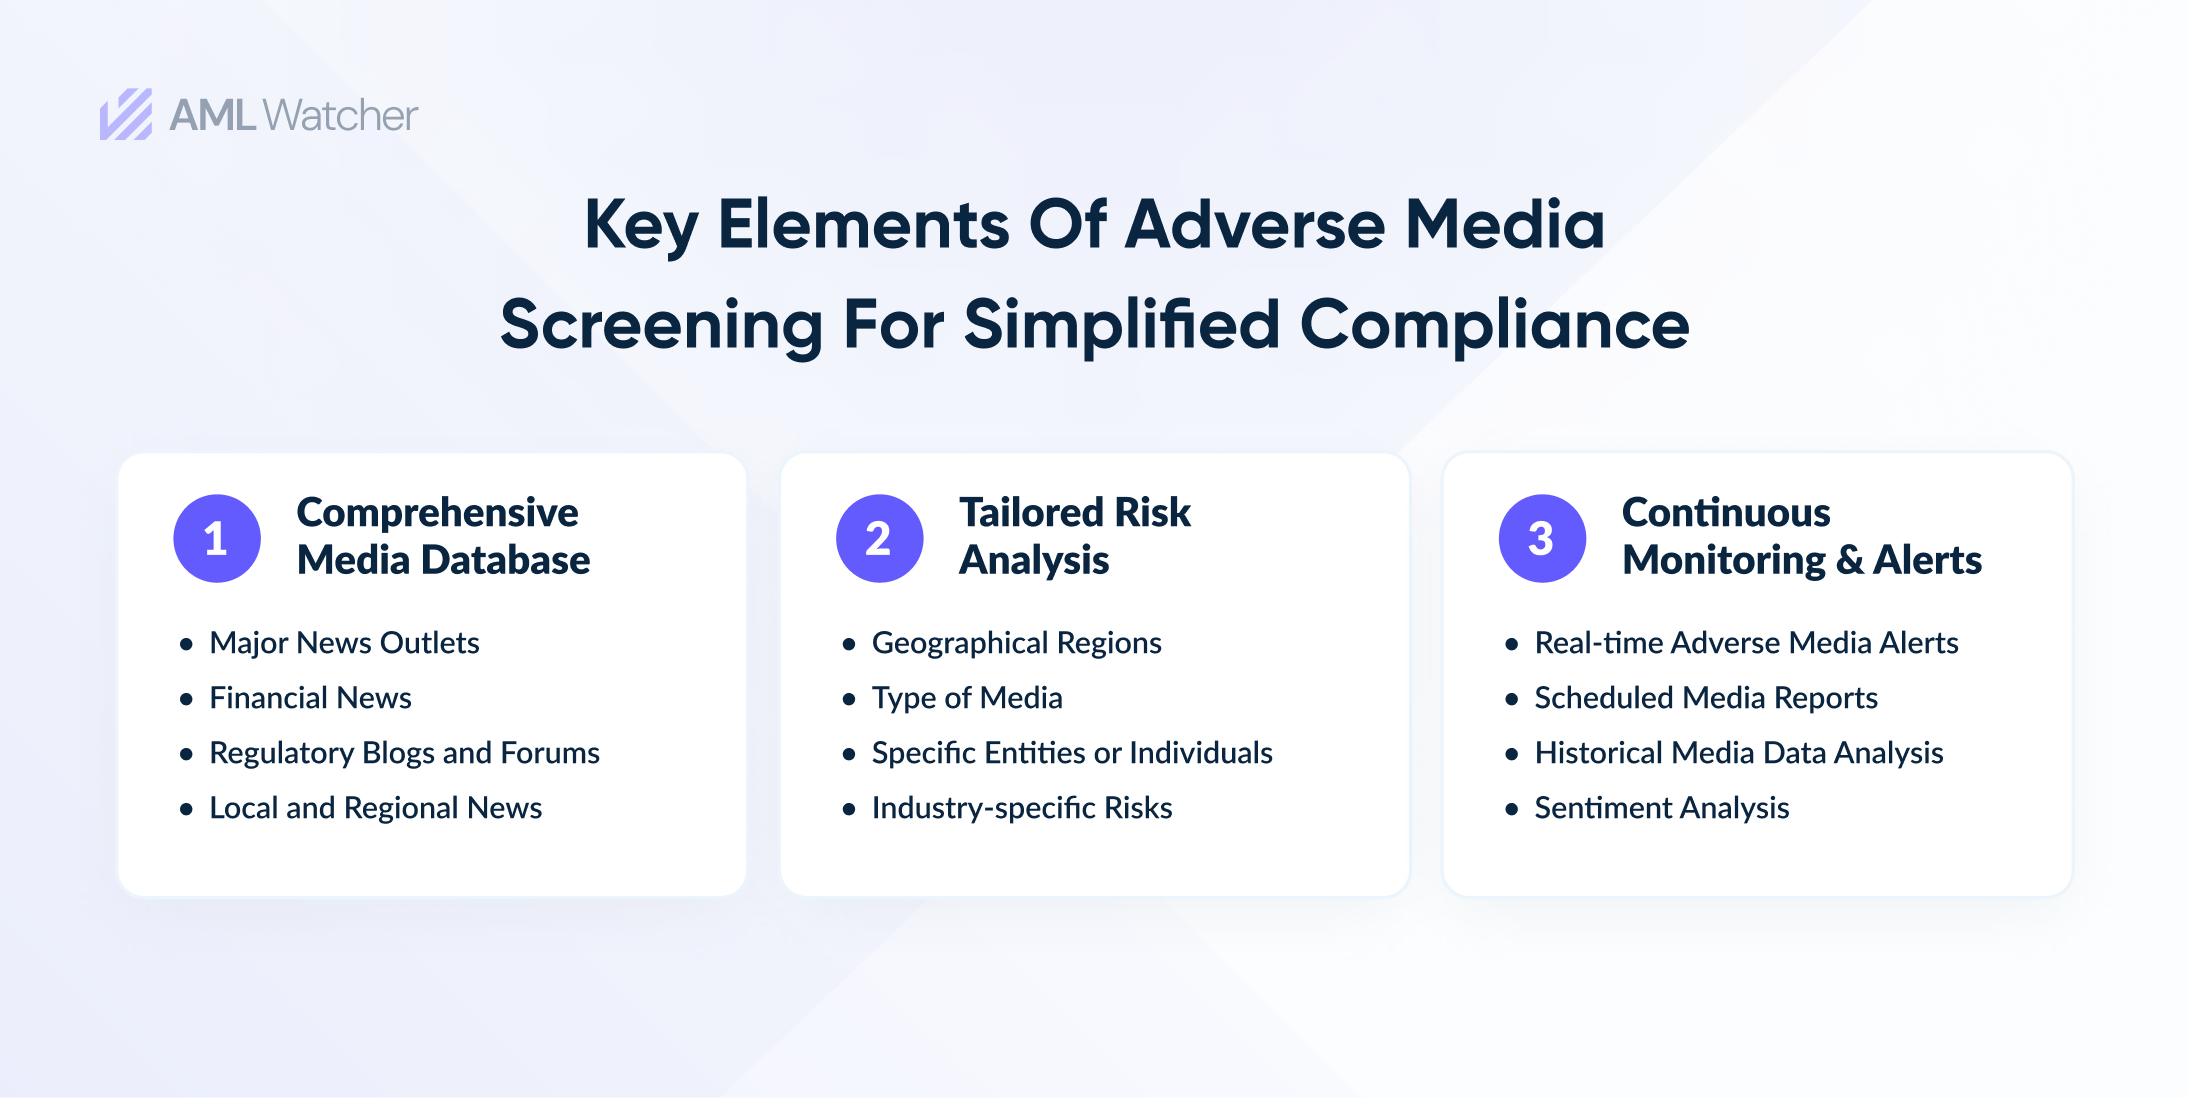 the featured image shows key elements of efficient adverse media screening tools to proactively find AML risks.